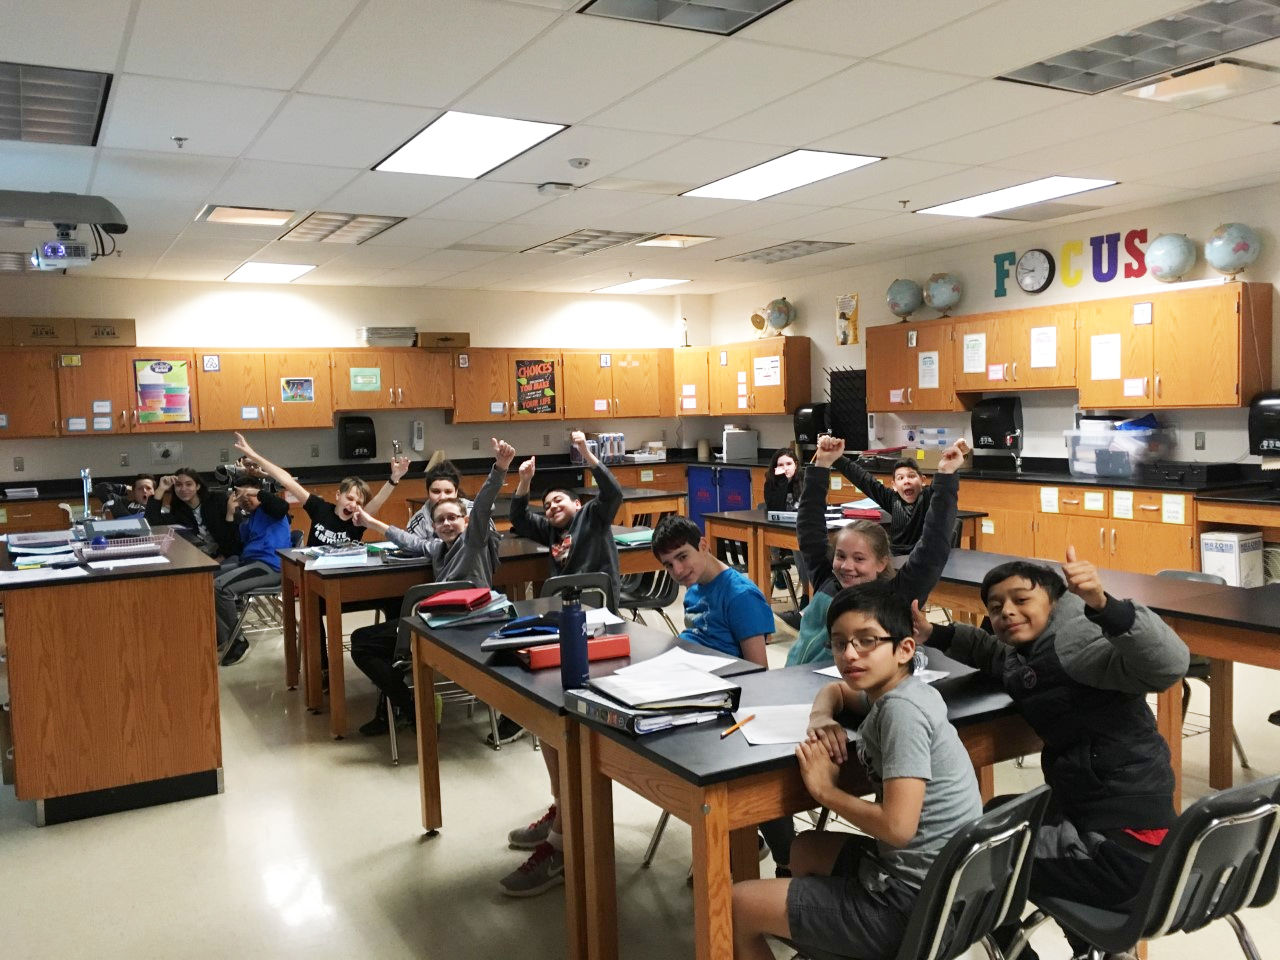 Students at Lunsford Middle School celebrate after learning they won first prize in the 2019 Clicks for Kids competition. (Courtesy Carrie Simms)